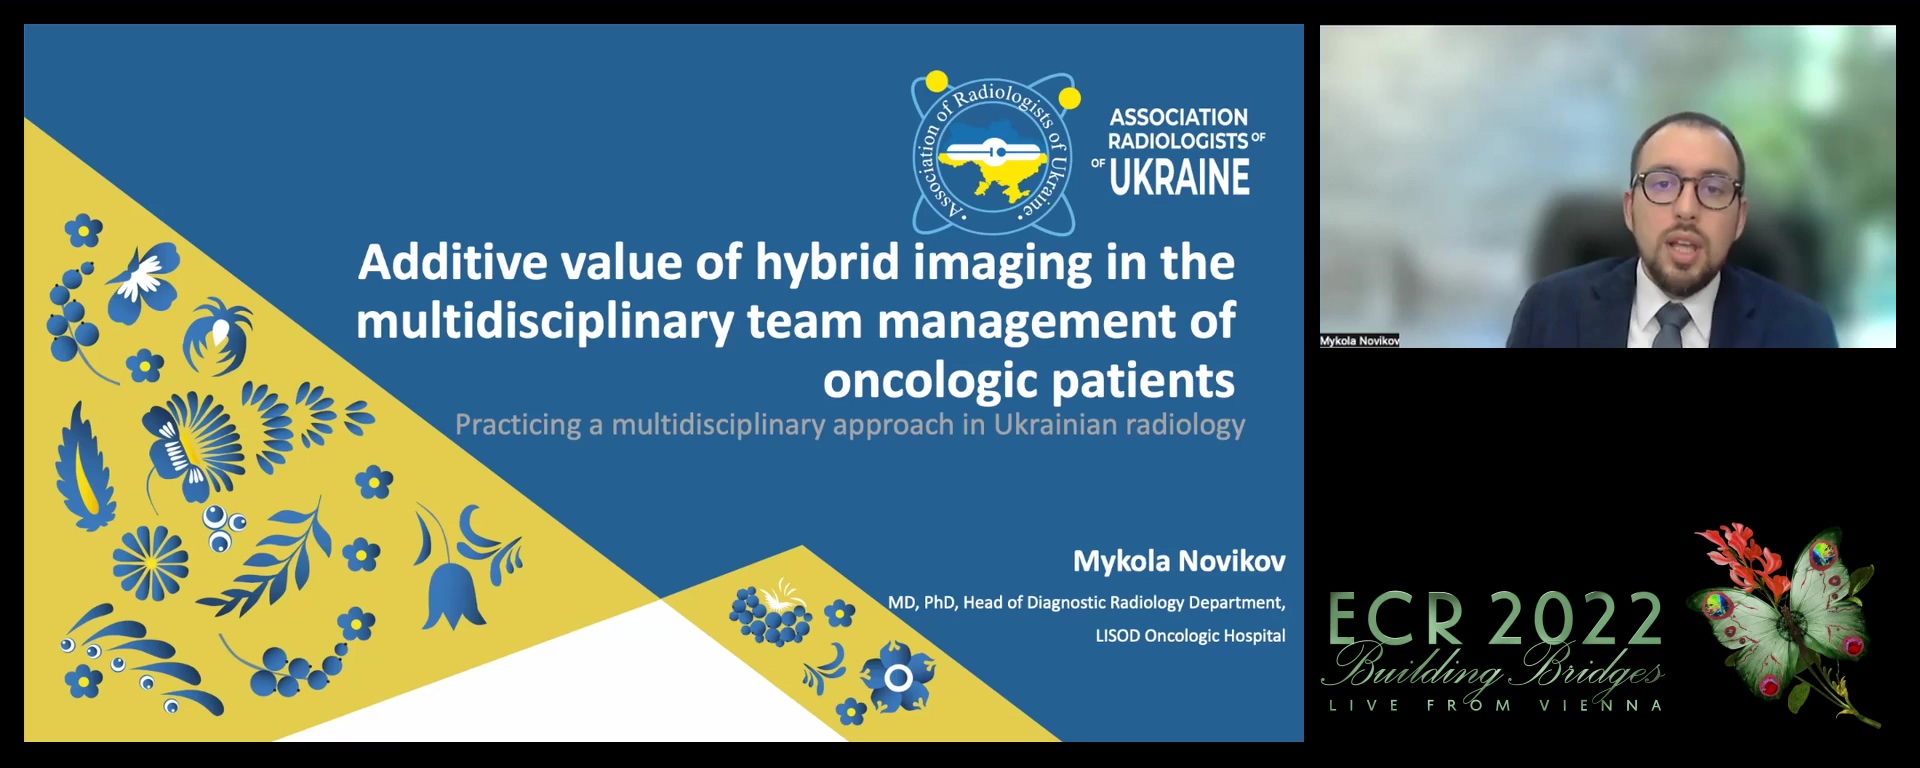 Additive value of hybrid imaging in the multidisciplinary team management of oncologic patients